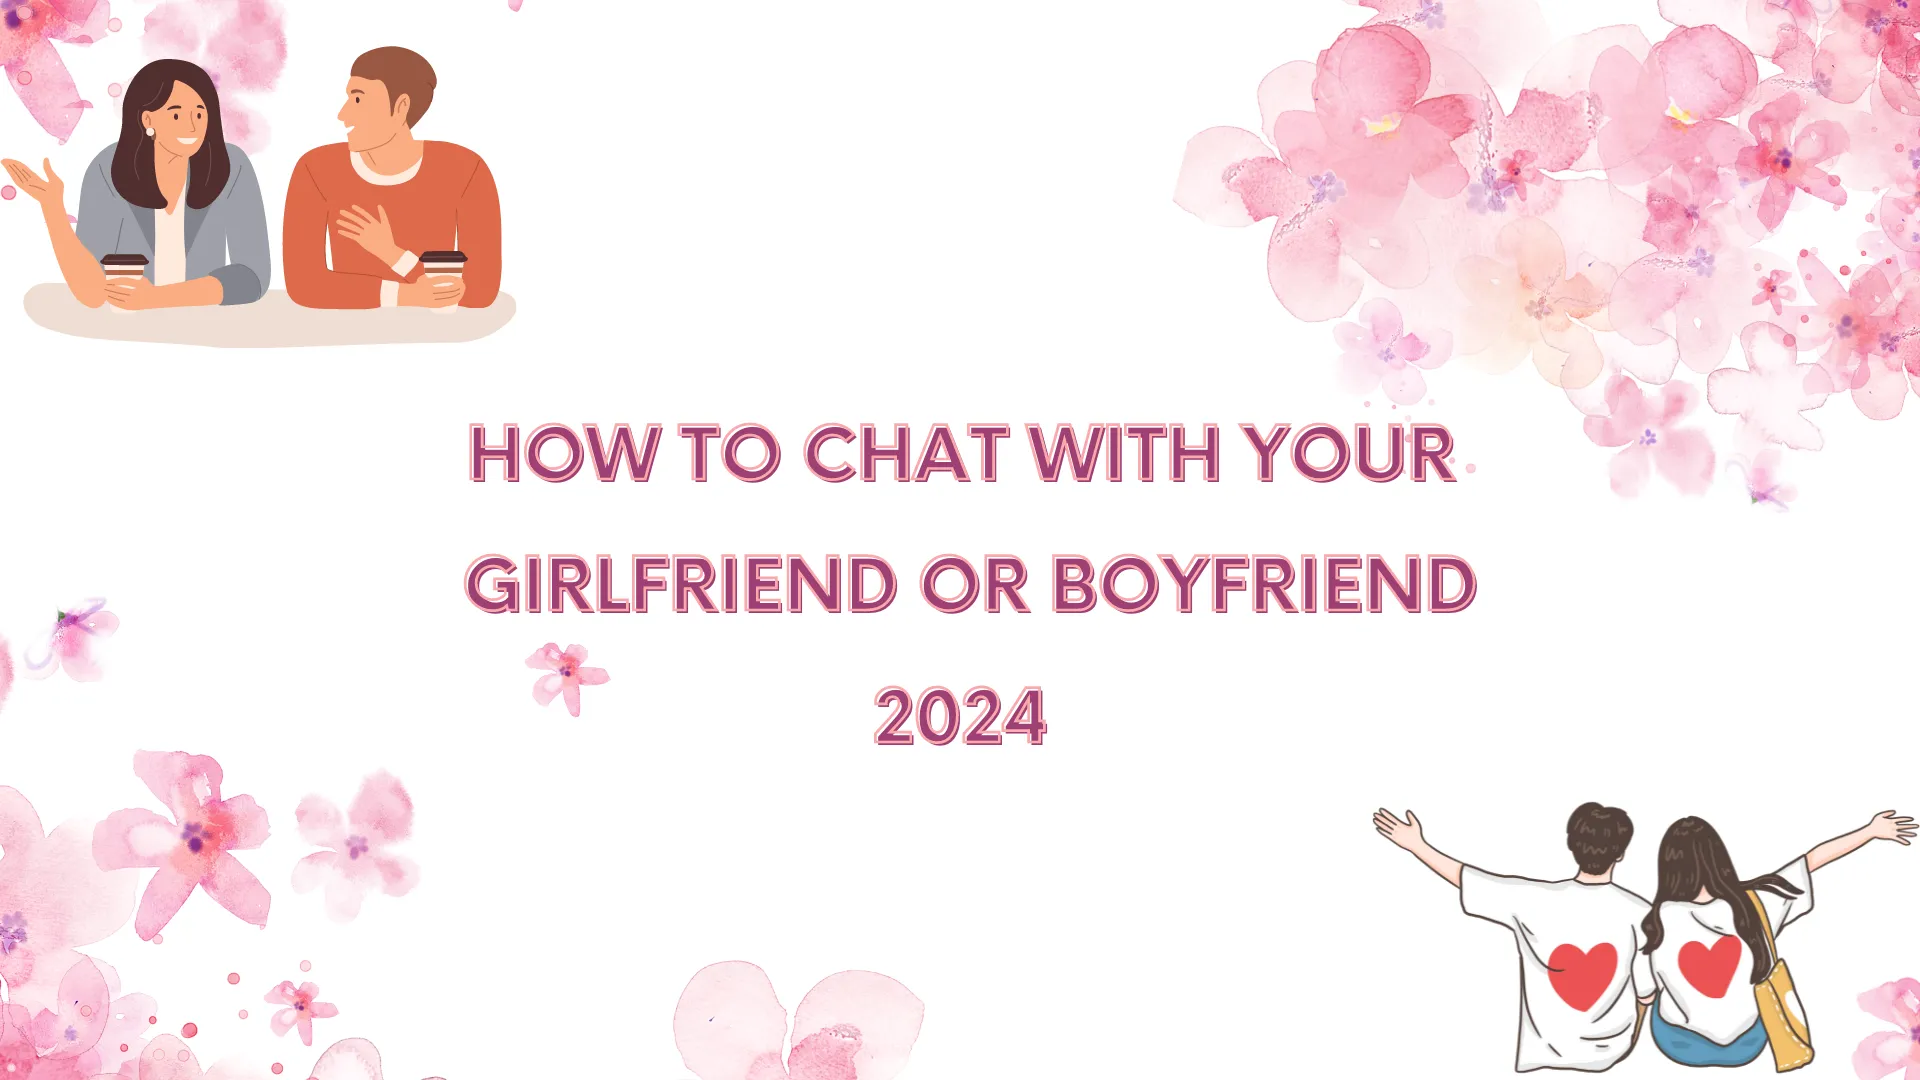 How to Chat with Your Girlfriend or Boyfriend 2024